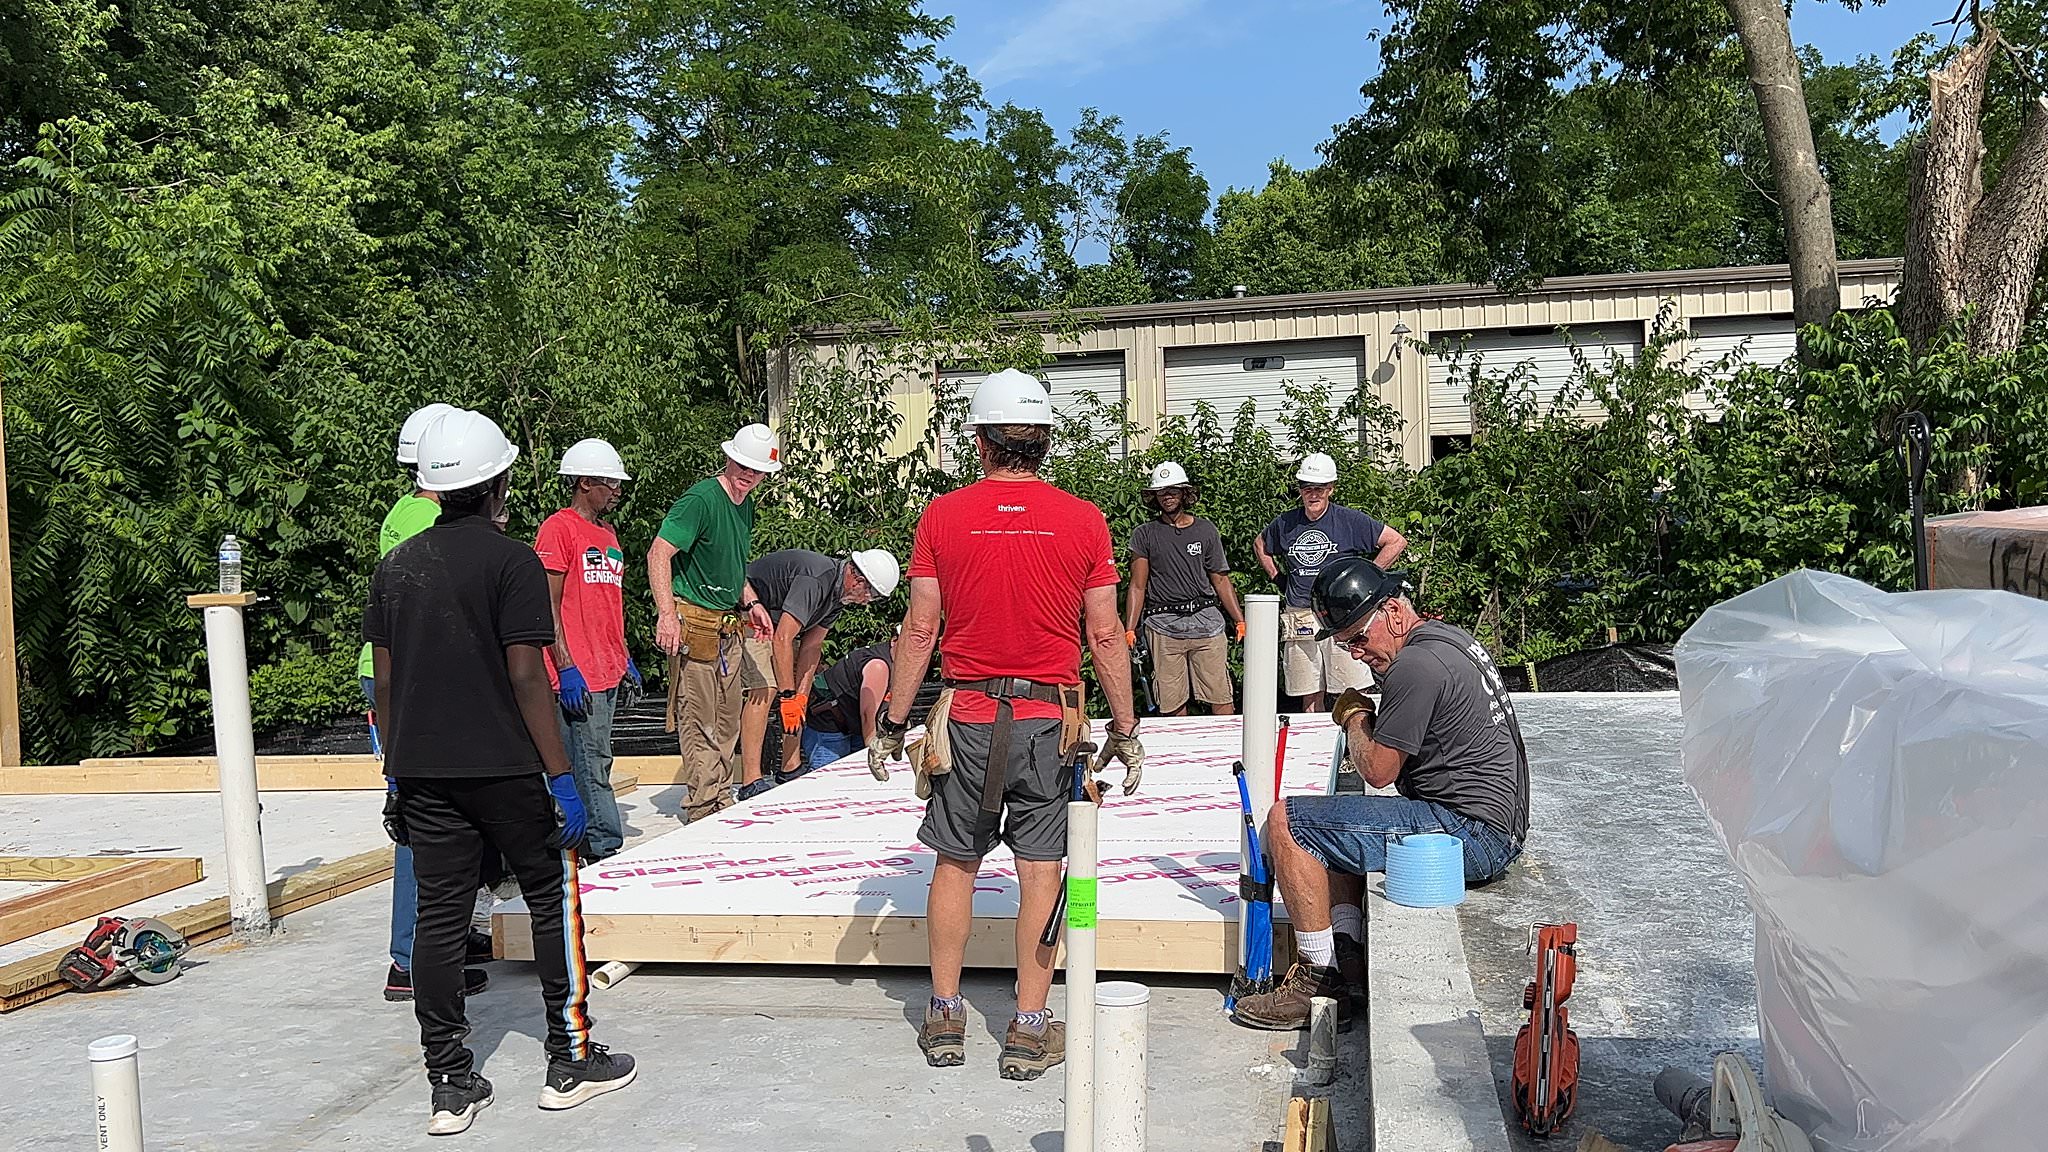 Participants working at Habitat for Humanity